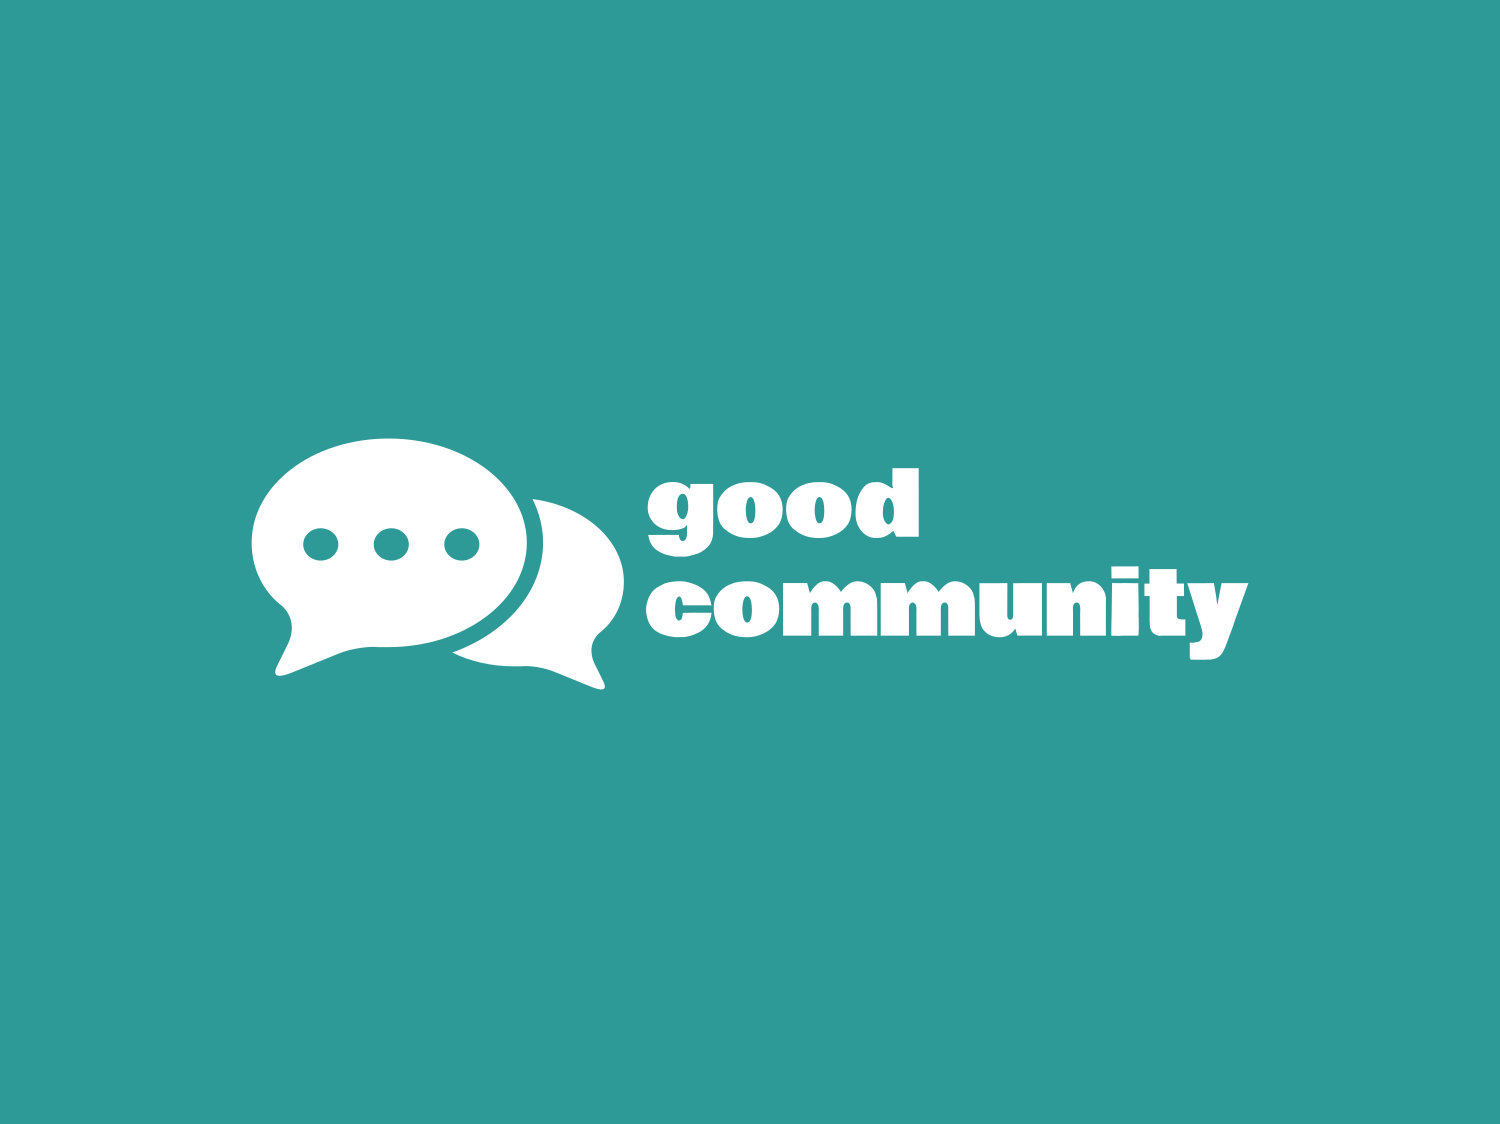 White icon of two speech bubbles next to white text in lower case that says Good Community. A teal background